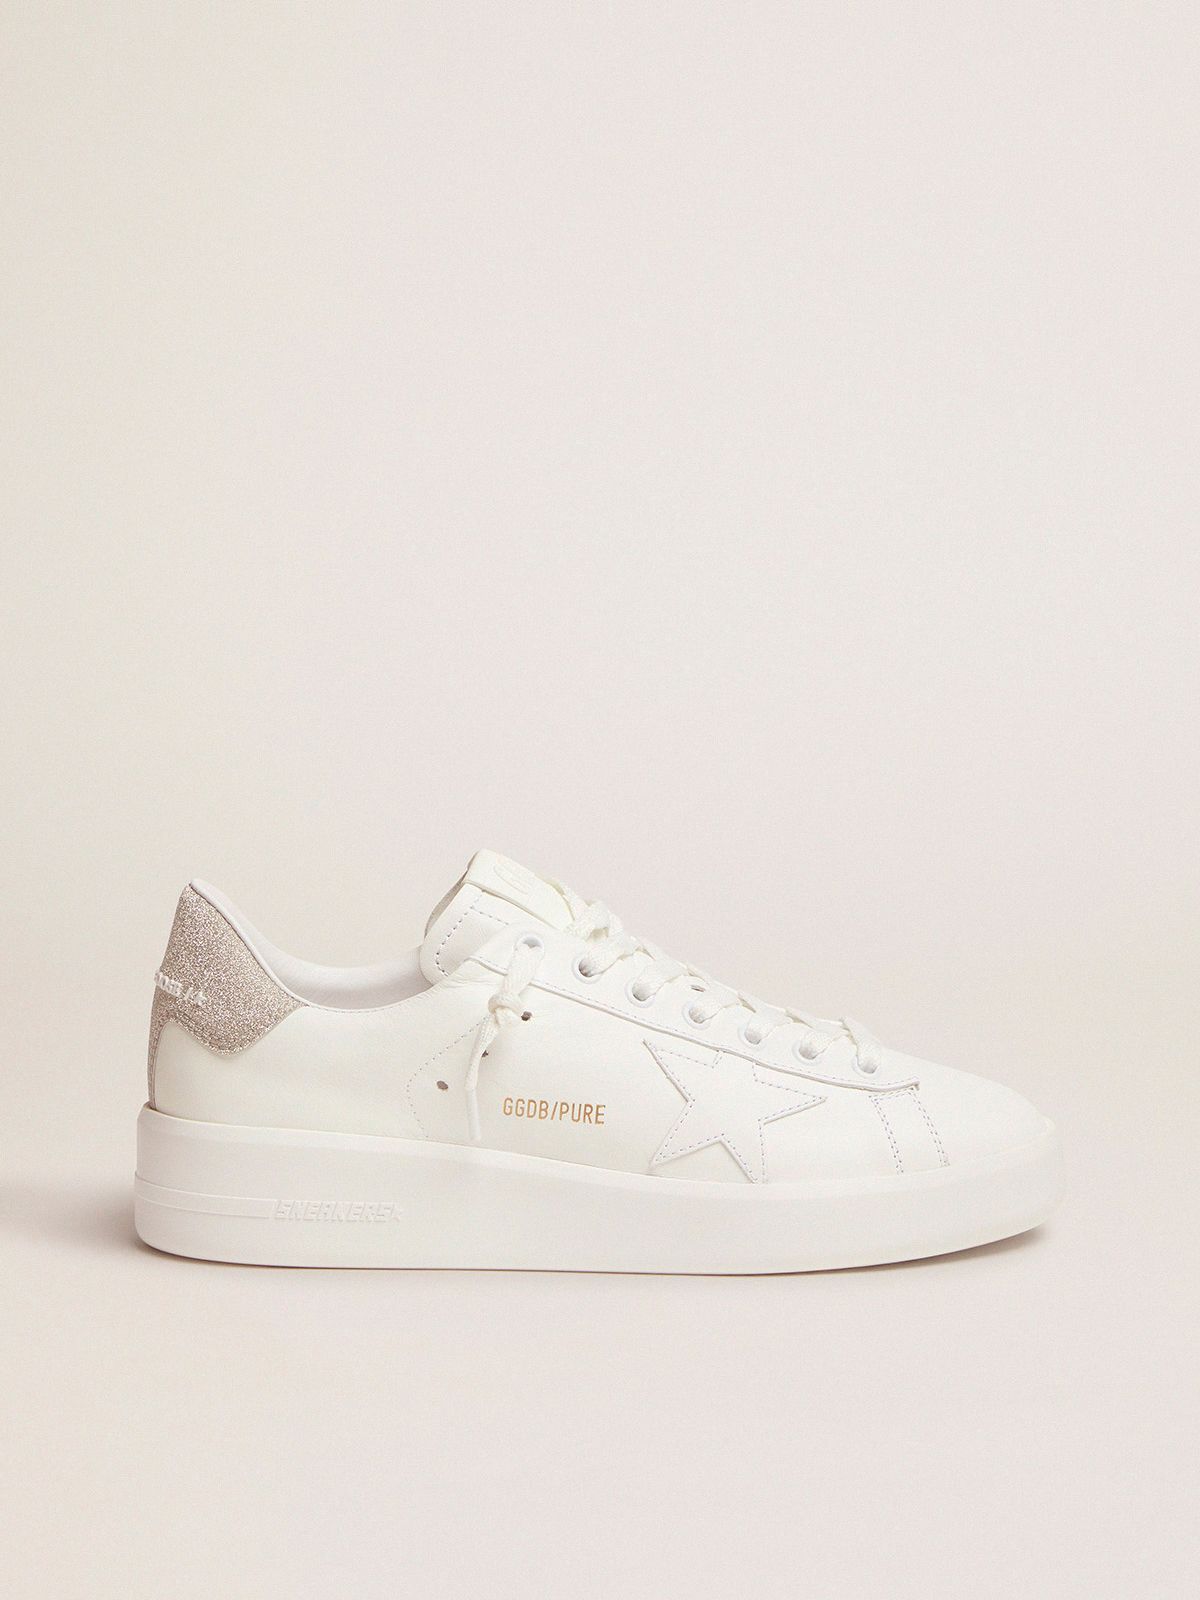 Sneakers Golden Goose Purestar sneakers in white leather with champagne glitter heel tab